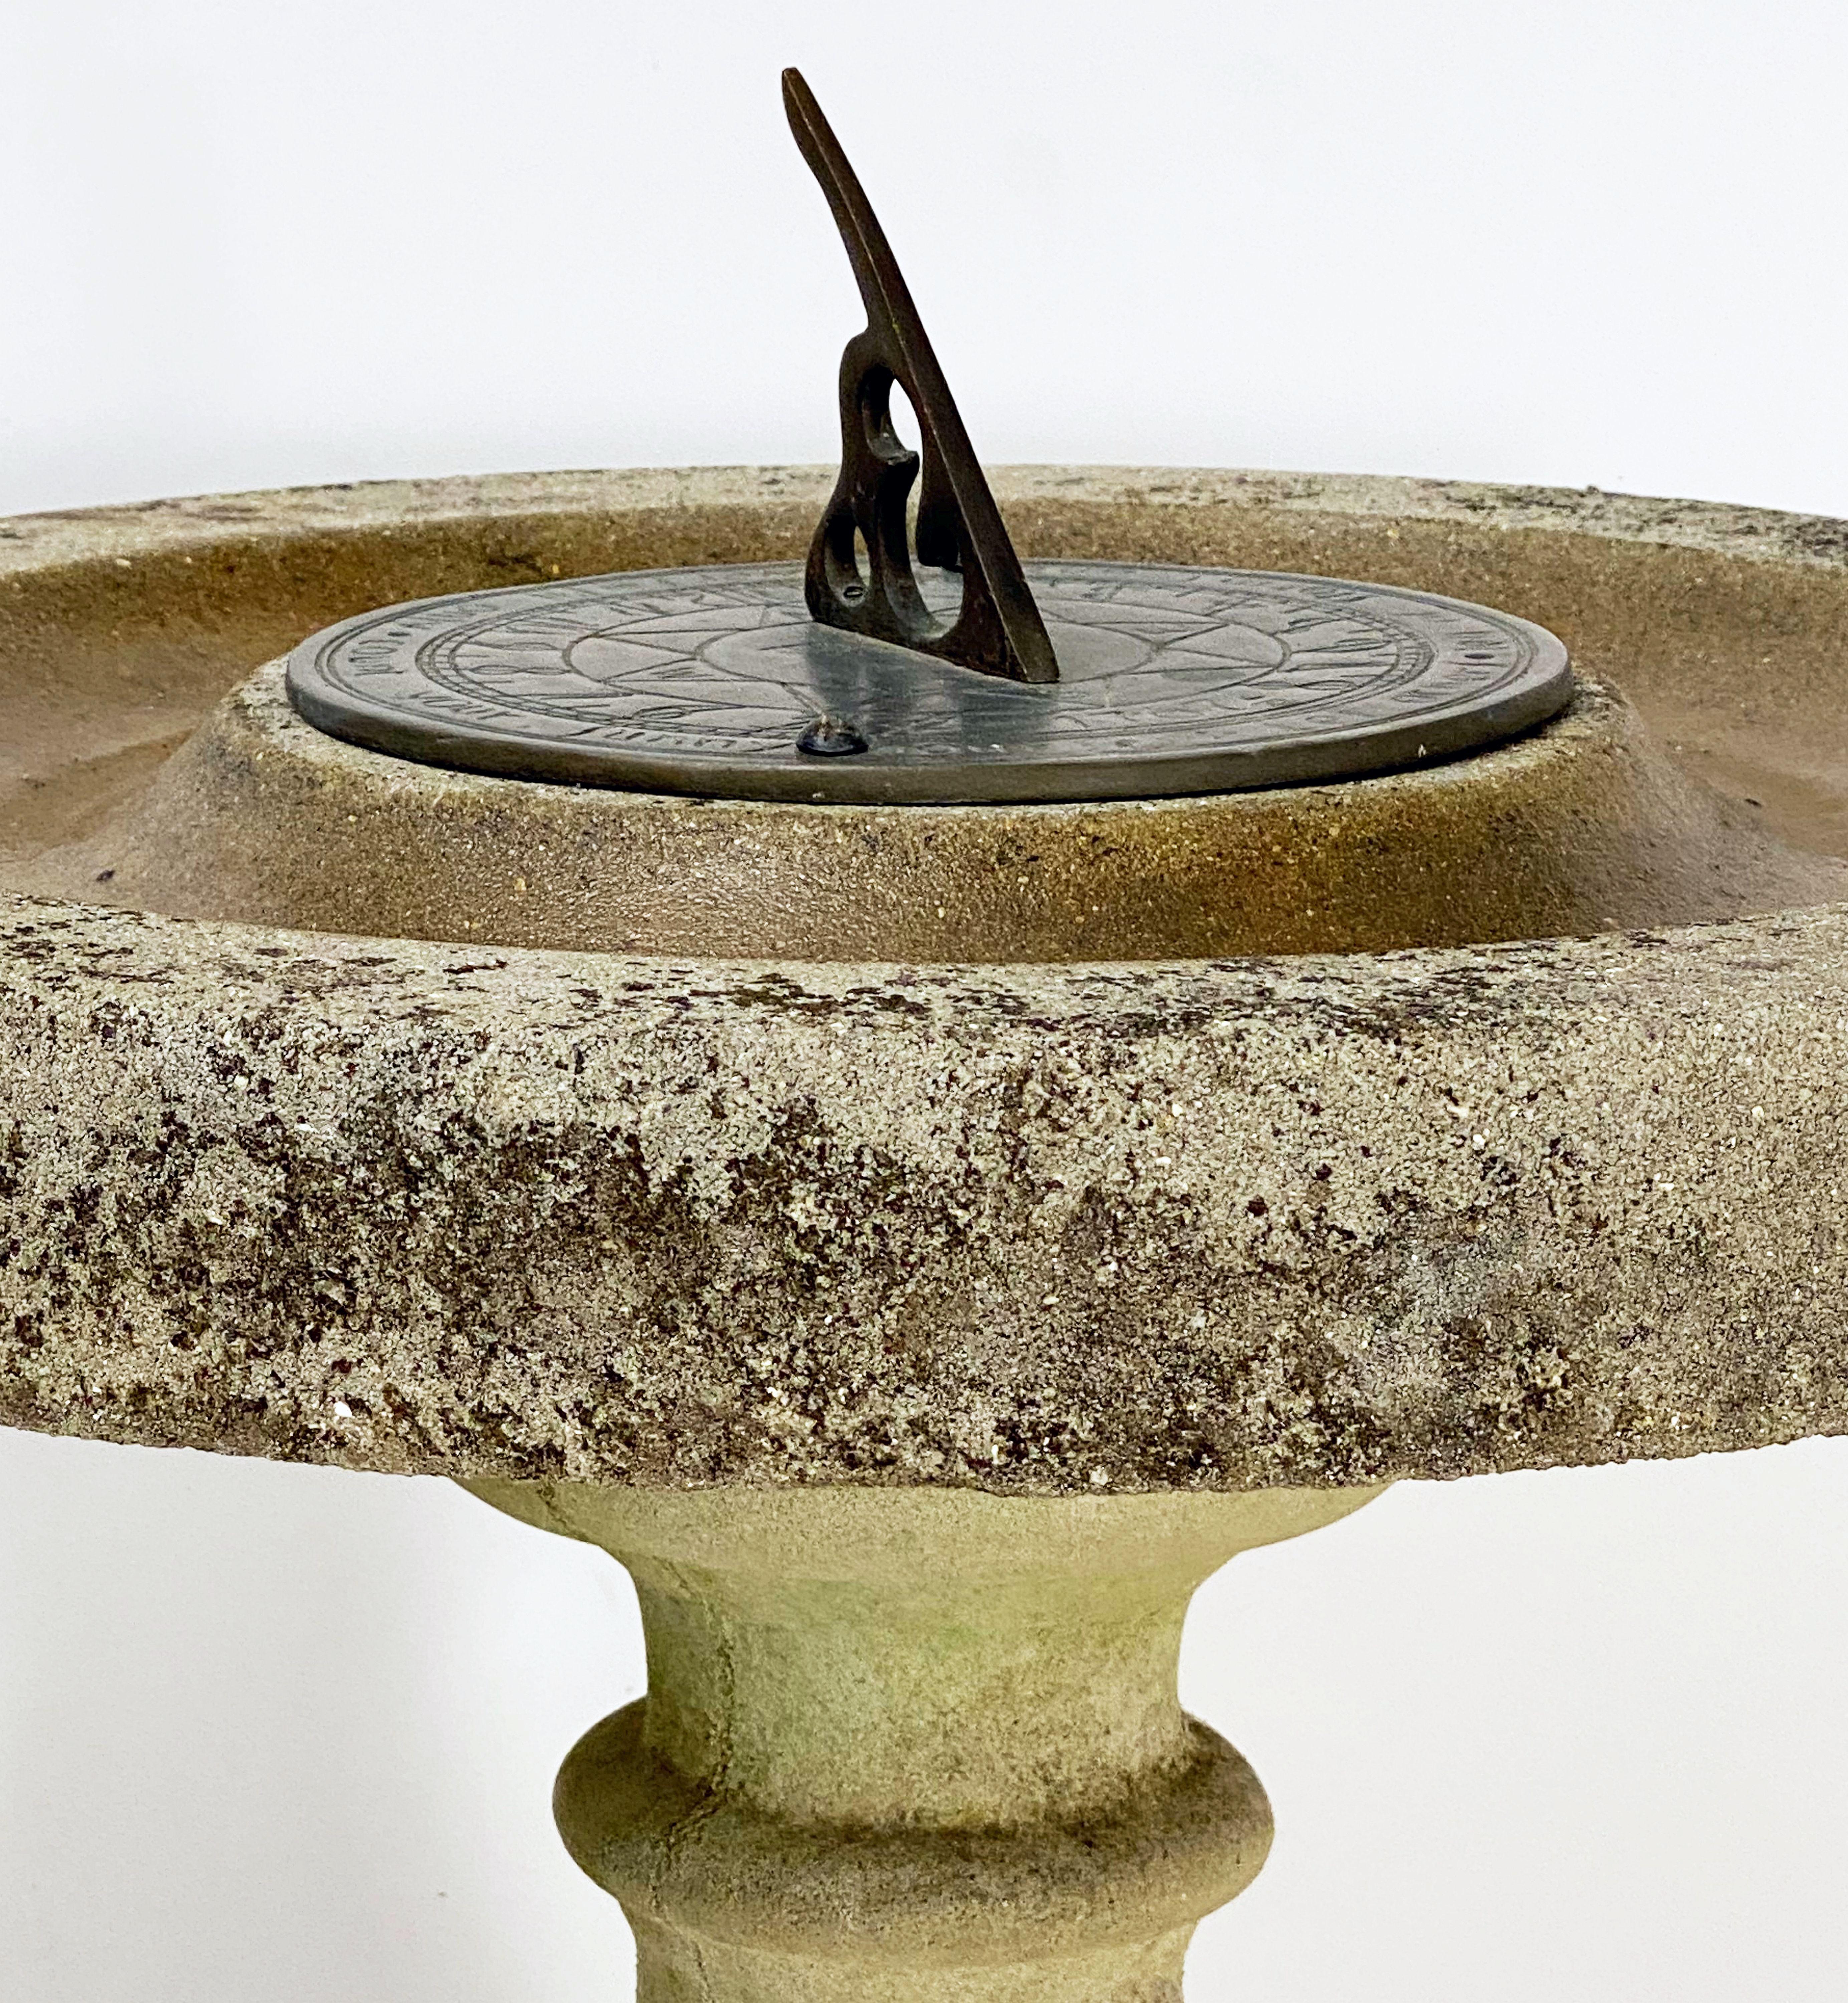 20th Century Large English Sundial and Bird Bath of Composition Stone with Bronze Dial